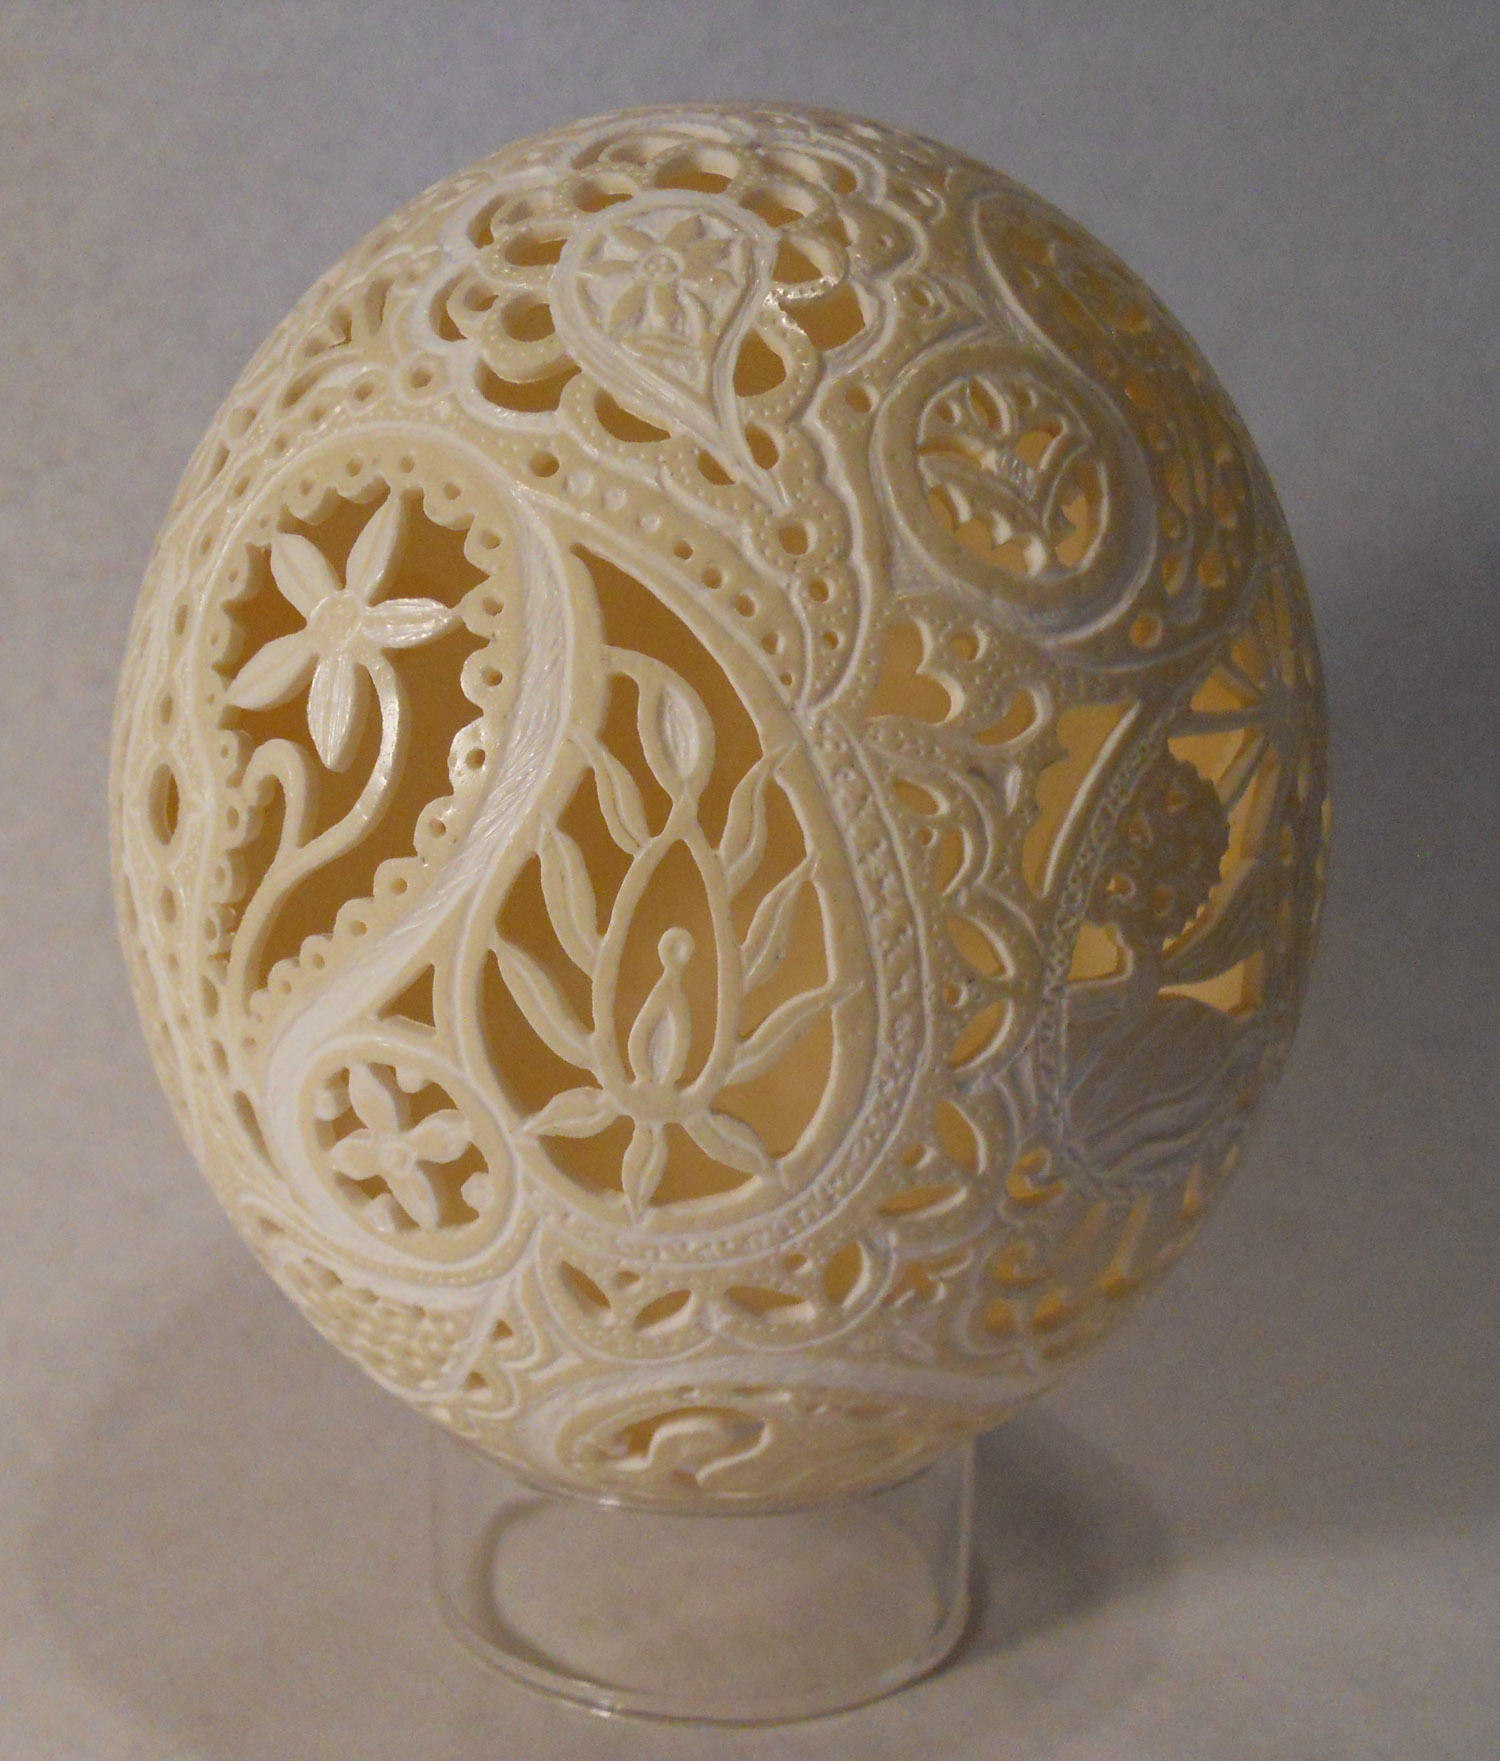 This Artist Makes Impossible Eggshell Carving Look Easy - Creators